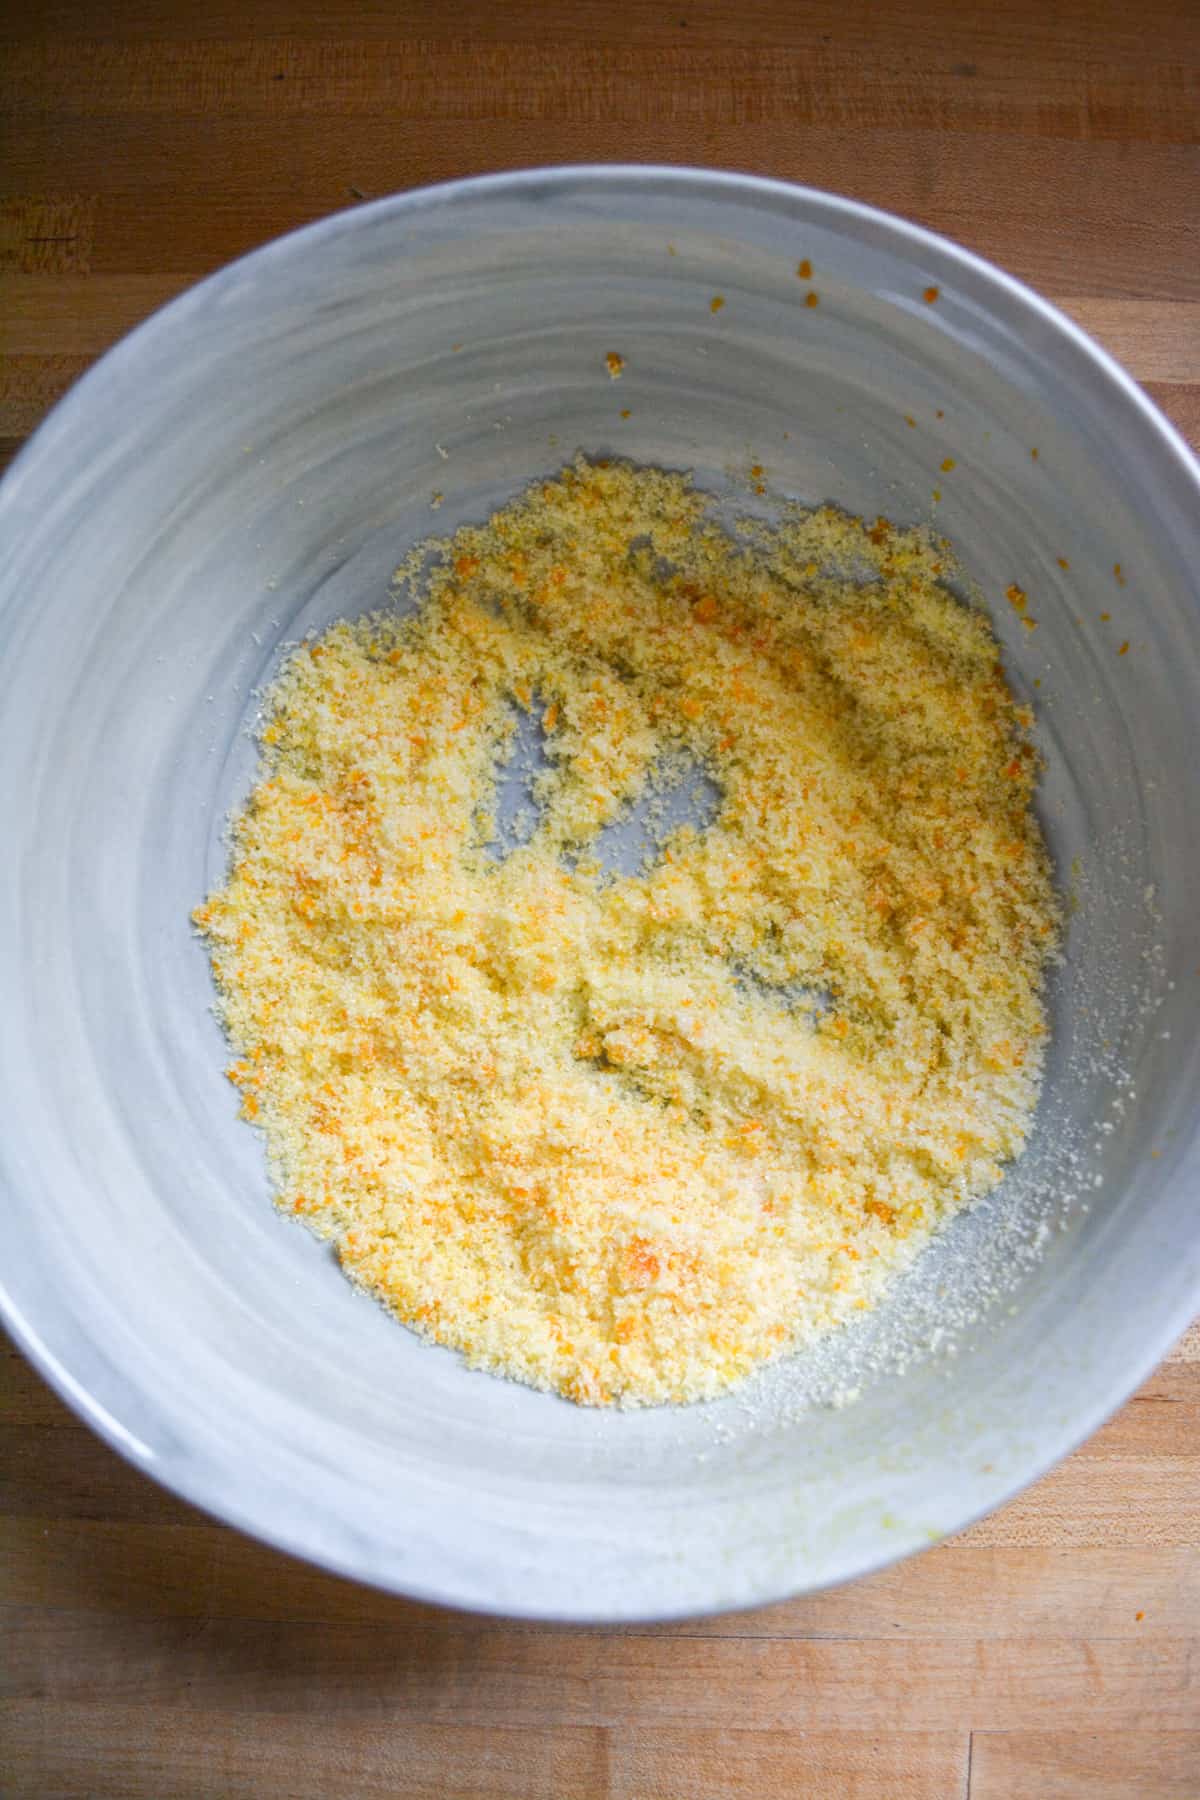 Orange zest rubbed into granulated sugar in a mixing bowl.